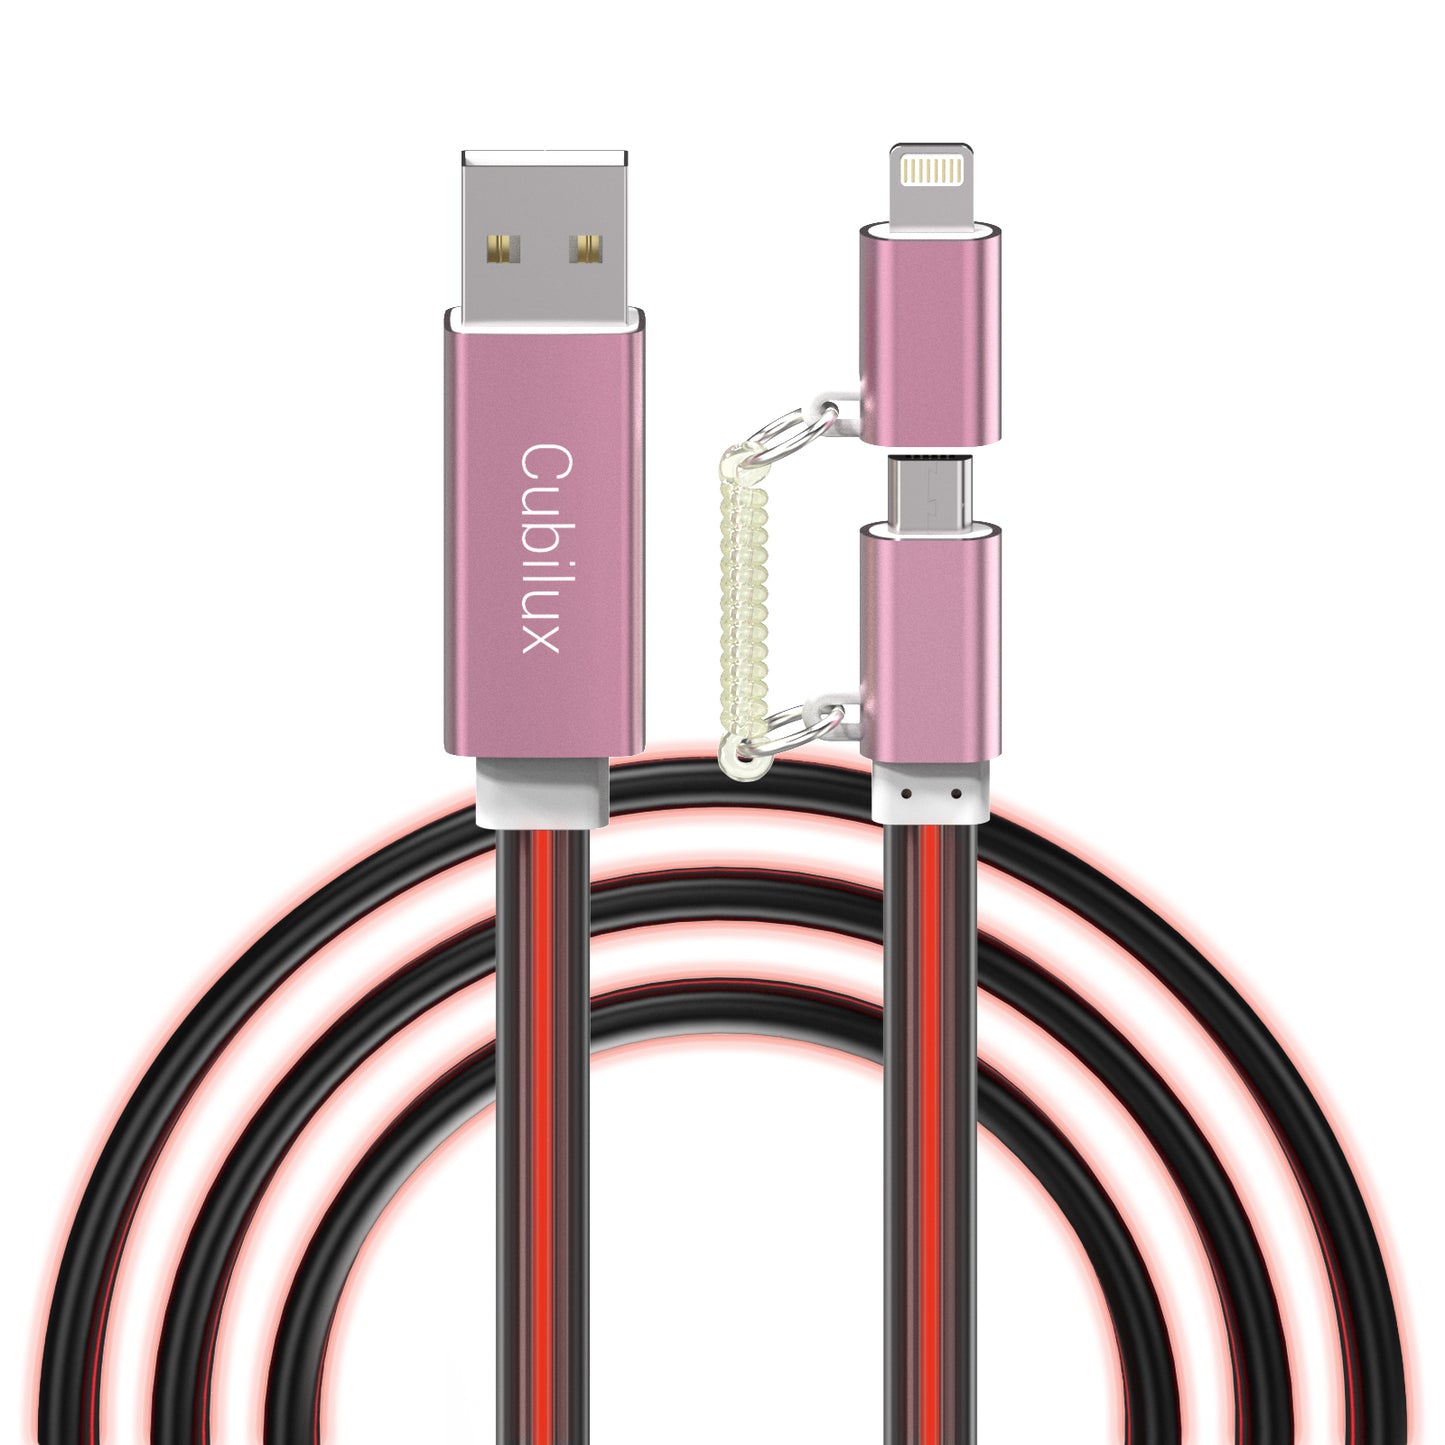 Glowing Lightning & Micro USB Charging Cable-Red,2FT